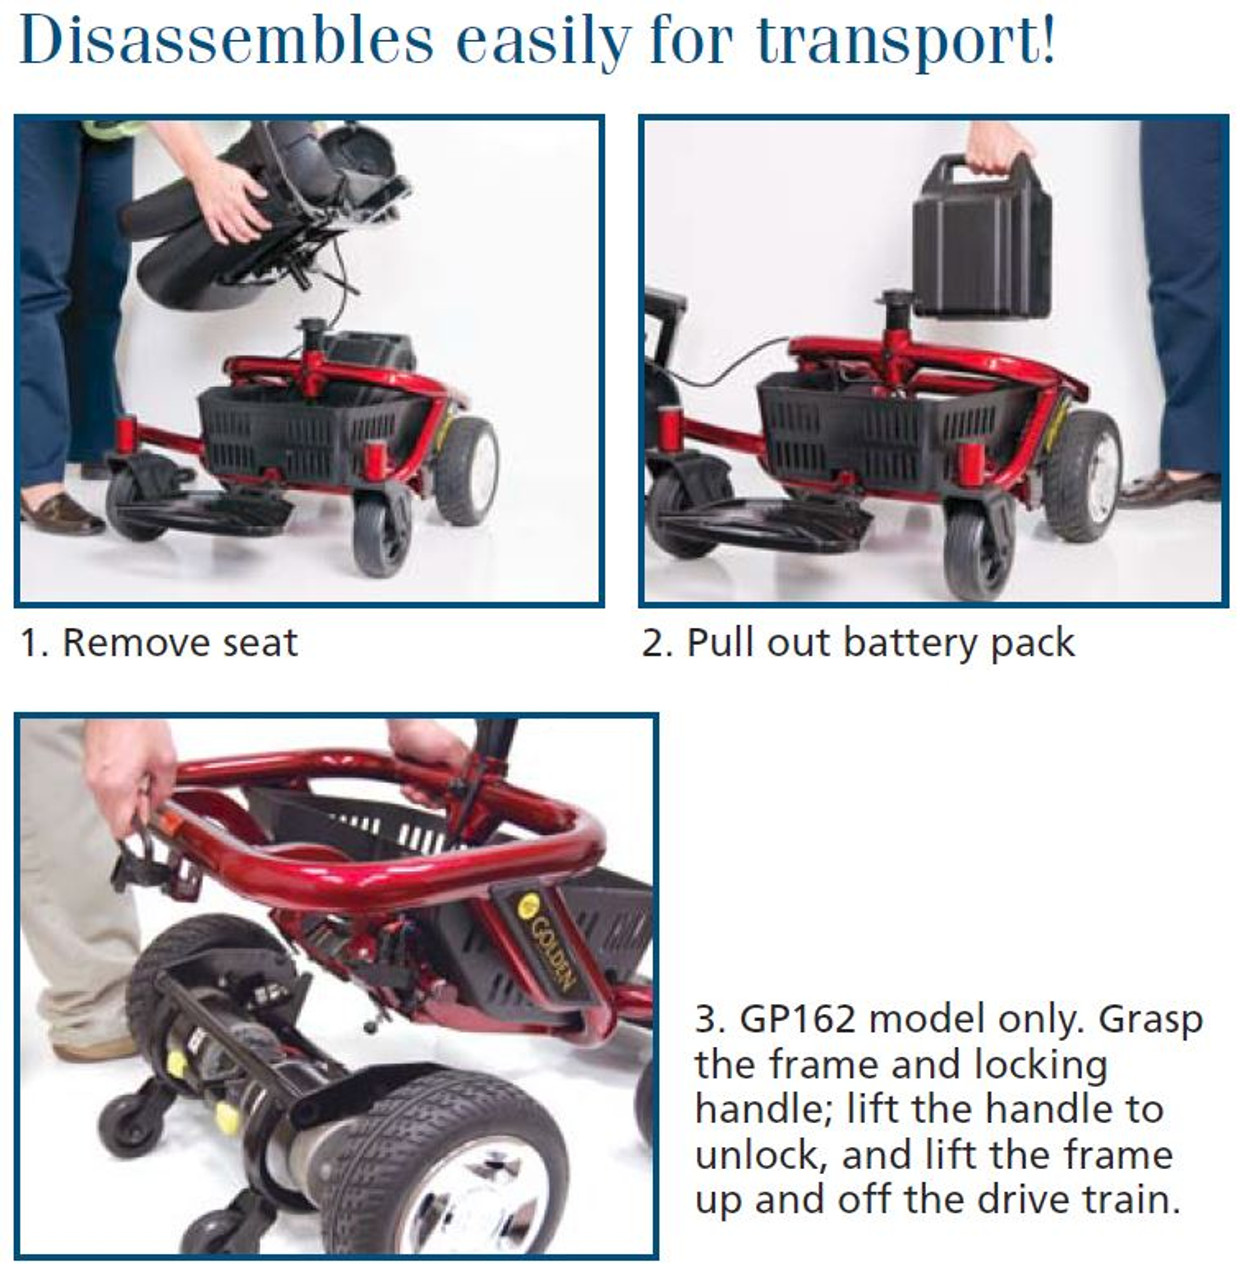 Easy disassembly for transport in most any vehicle trunk.